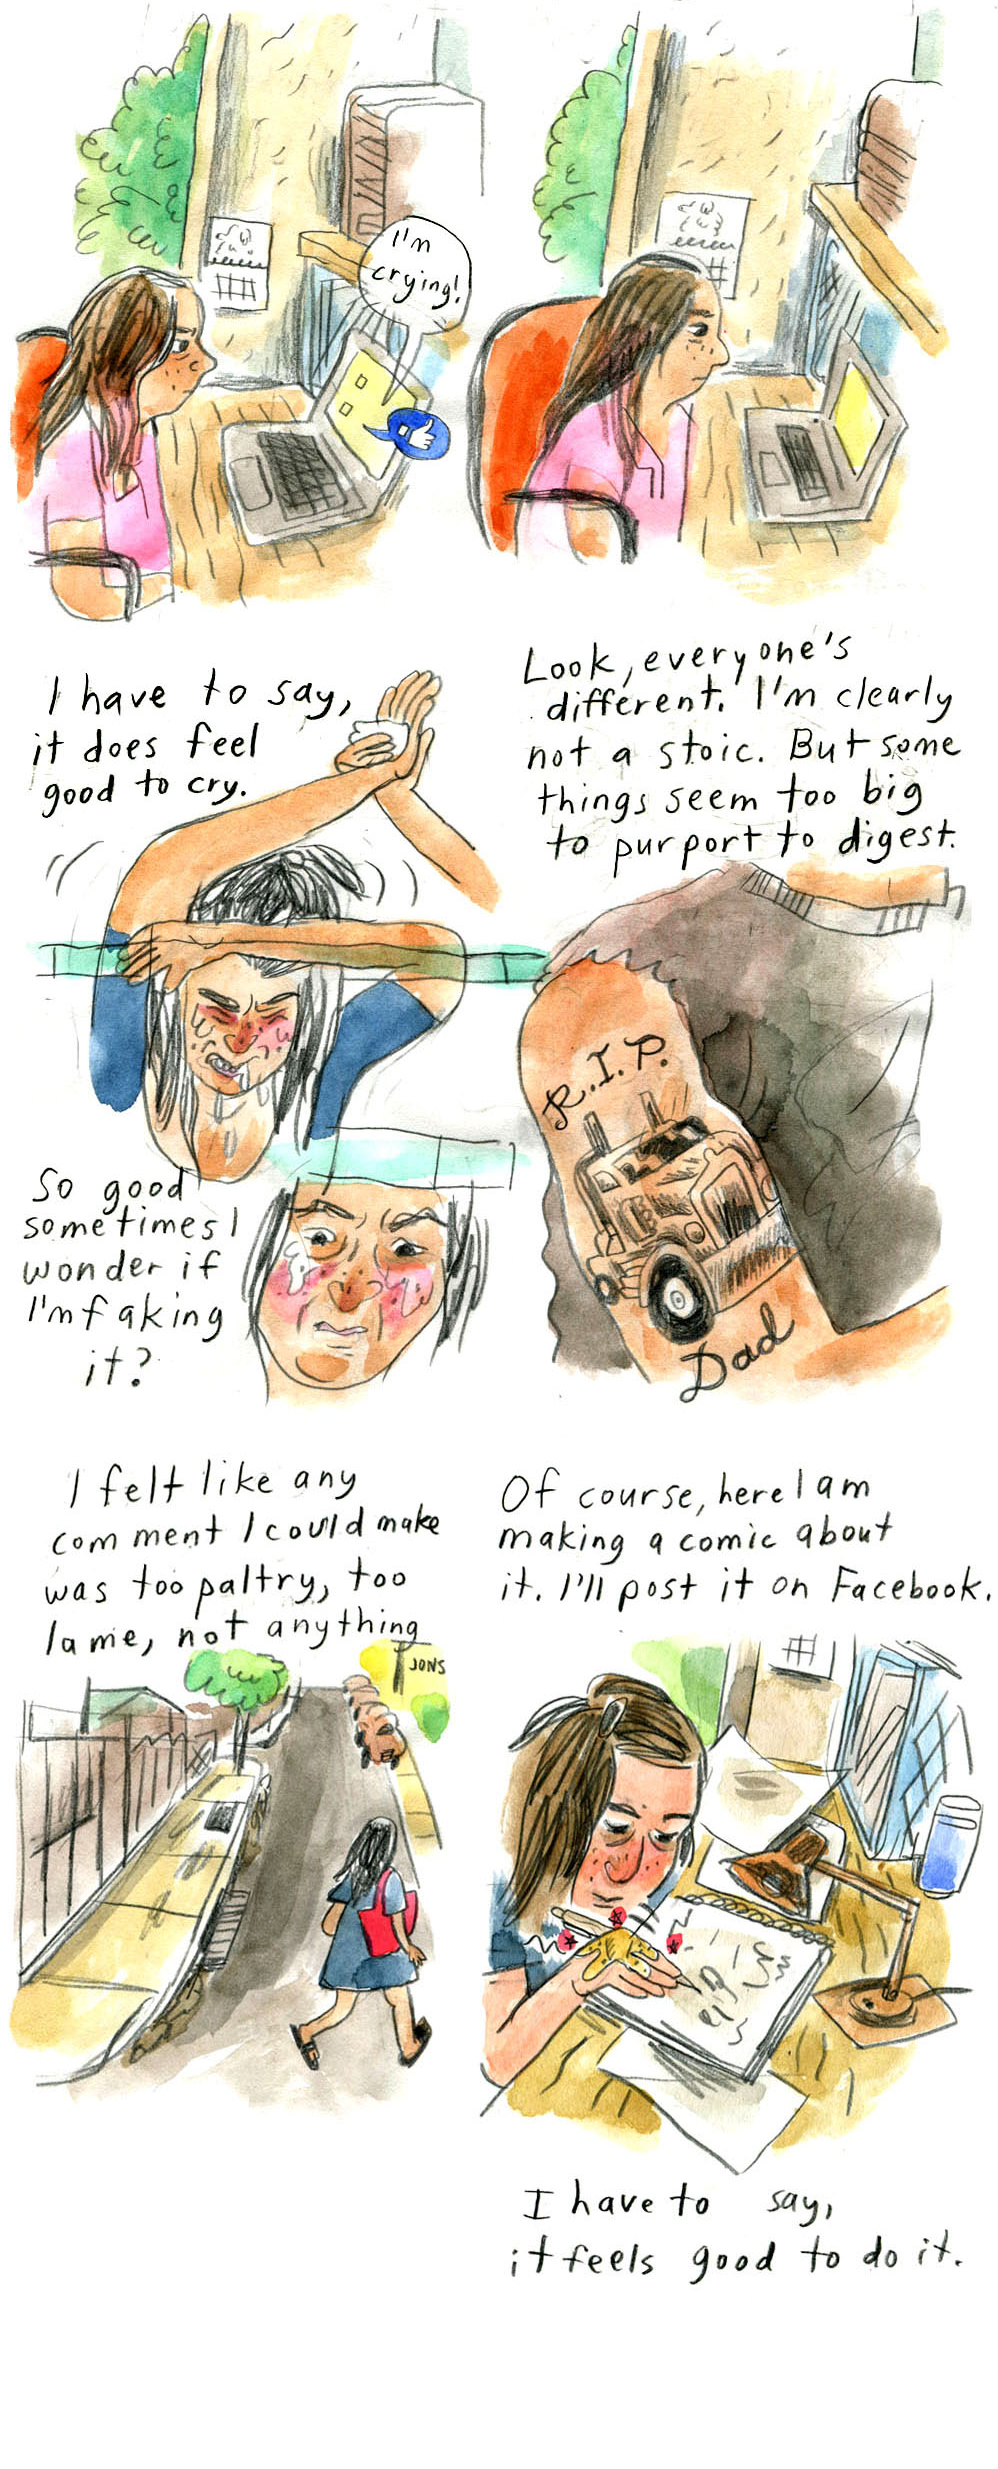 9 continued. Vanessa sits at her desk wearing a pink shirt, brow slightly furrowed, looking at a laptop. Speech bubbles come out of the screen: "I'm crying!" and a Facebook thumbs-up reaction.
10 continued. Same image as last panel, but no text bubbles and Vanessa looks more dejected, expression slightly softer.

11. "I have to say, it does feel good to cry"
Vanessa leans on a bar, resting her head on one arm while raising the other. Her partner, mostly off panel, holds a bandage to her raised hand. She is crying and grimacing in pain.
Narration continues, "So good sometimes I wonder if I'm faking it?"
A close up of her face, which looks concerned, introspective, slightly ashamed, perhaps.

12. "Look, everyone's different. I'm clearly not a stoic. But some things seem too big to purport to digest."
An image of a person's torso and right arm: they wear a gray cutoff muscle tee and show off their bicep half-sleeve black-and-white tattoo of a heavy commercial truck framed by the words "R.I.P. Dad"

13. "I felt like any comment I could make was too paltry, too lame, not anything."
Vanessa walks away on a street dotted with a tree and a few cars in the background, wearing her blue dress and a red bag.

14. "Of course, here I am making a comic about it. I'll post it on Facebook."
Vanessa sits with her face close to her desk, drawing in a sketchbook. There is a desk lamp and papers strewn on the desk. She looks tired, but content.
"I have to say, it feels good to do it."